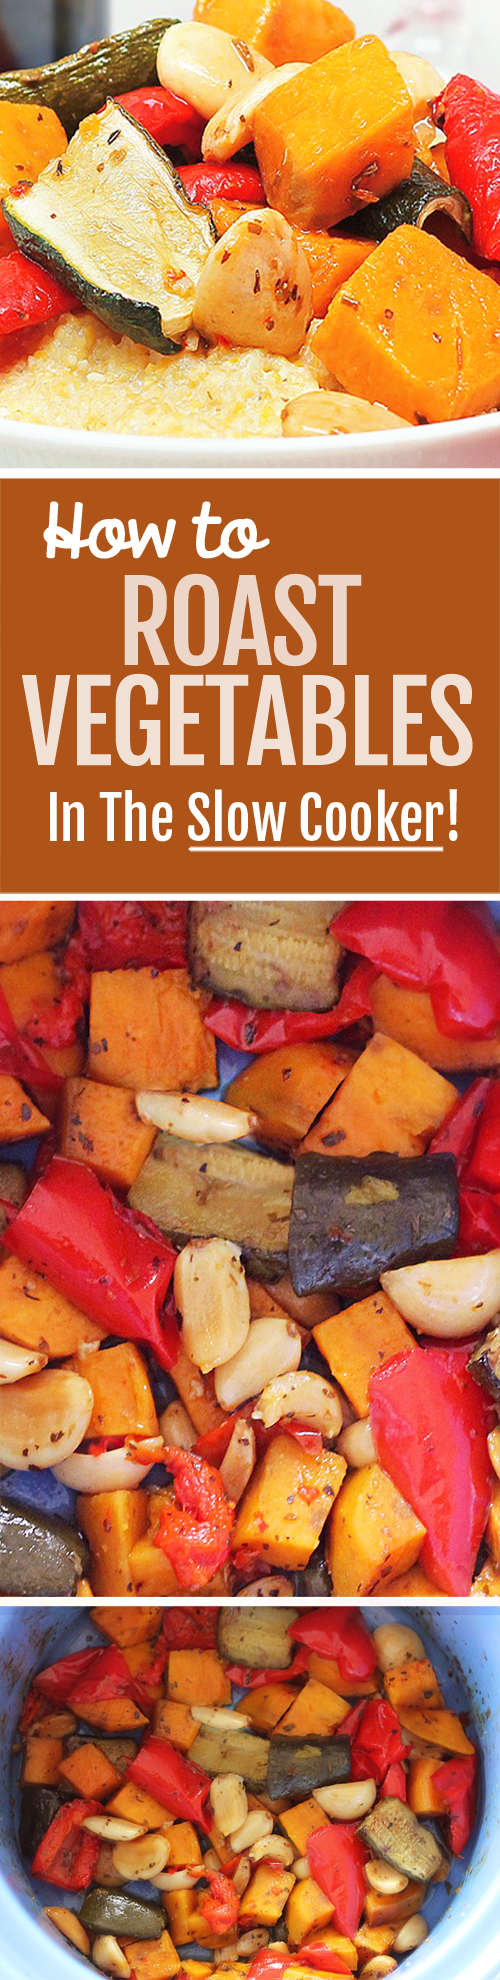 How To Roast Vegetables In The Slow Cooker